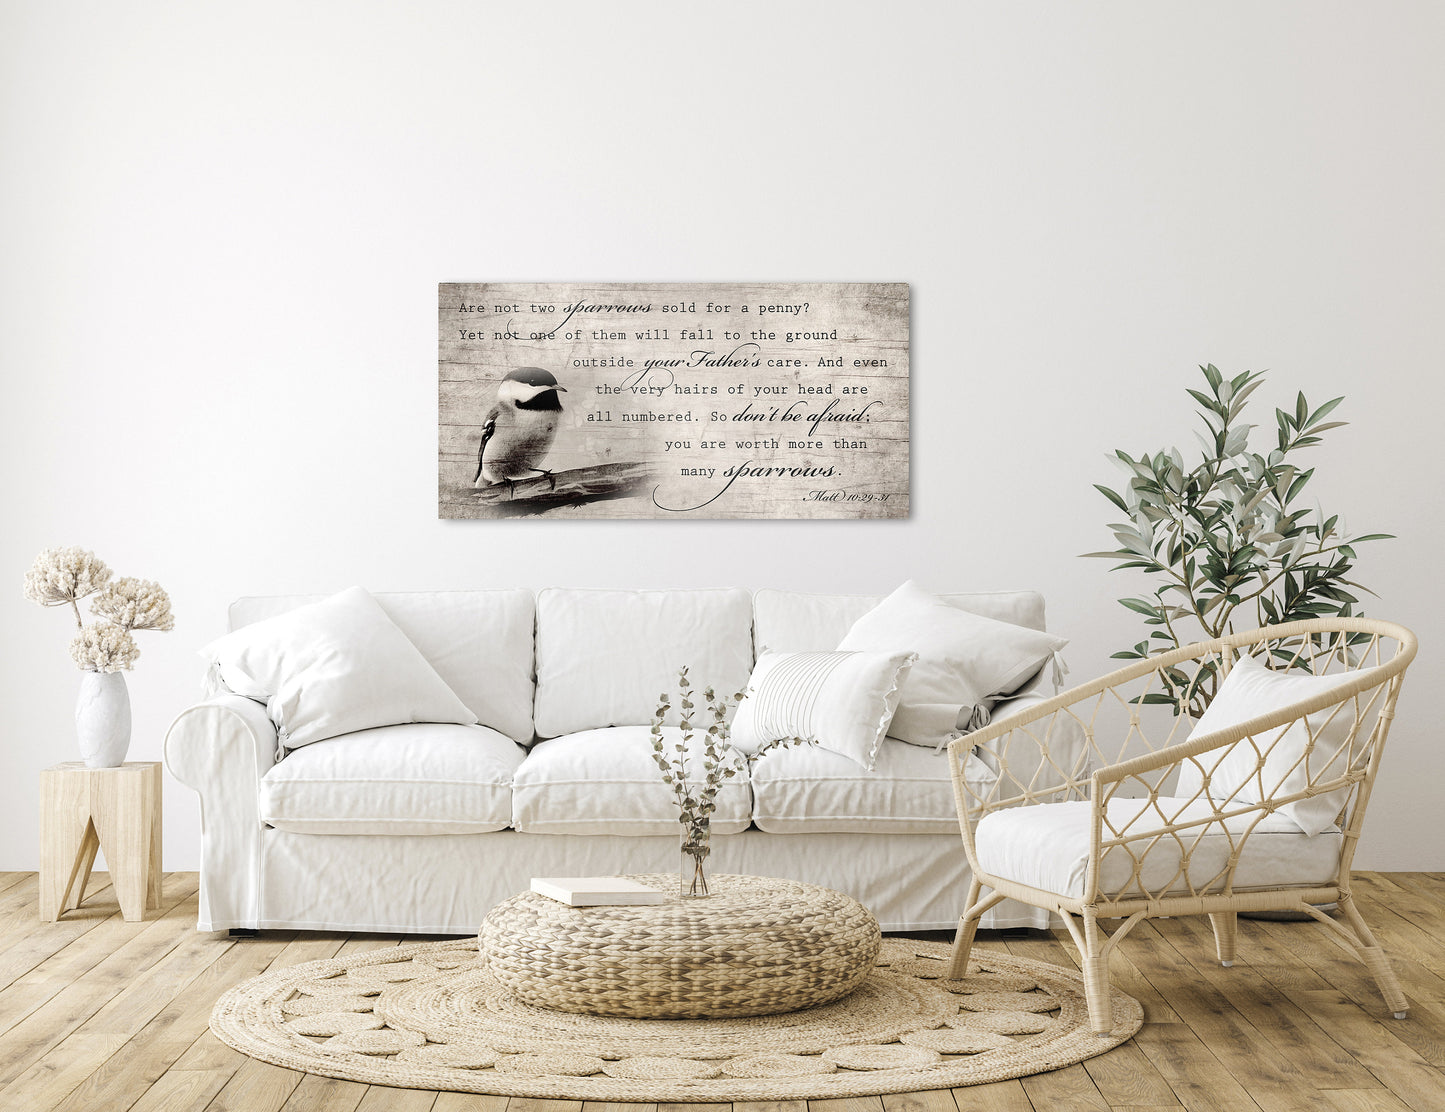 
                  
                    More than Many Sparrows, Matthew 10:29-31 Scripture Art, God's Protection, Christian Wall Decor, Encouragement decor, Wood sign with verse
                  
                